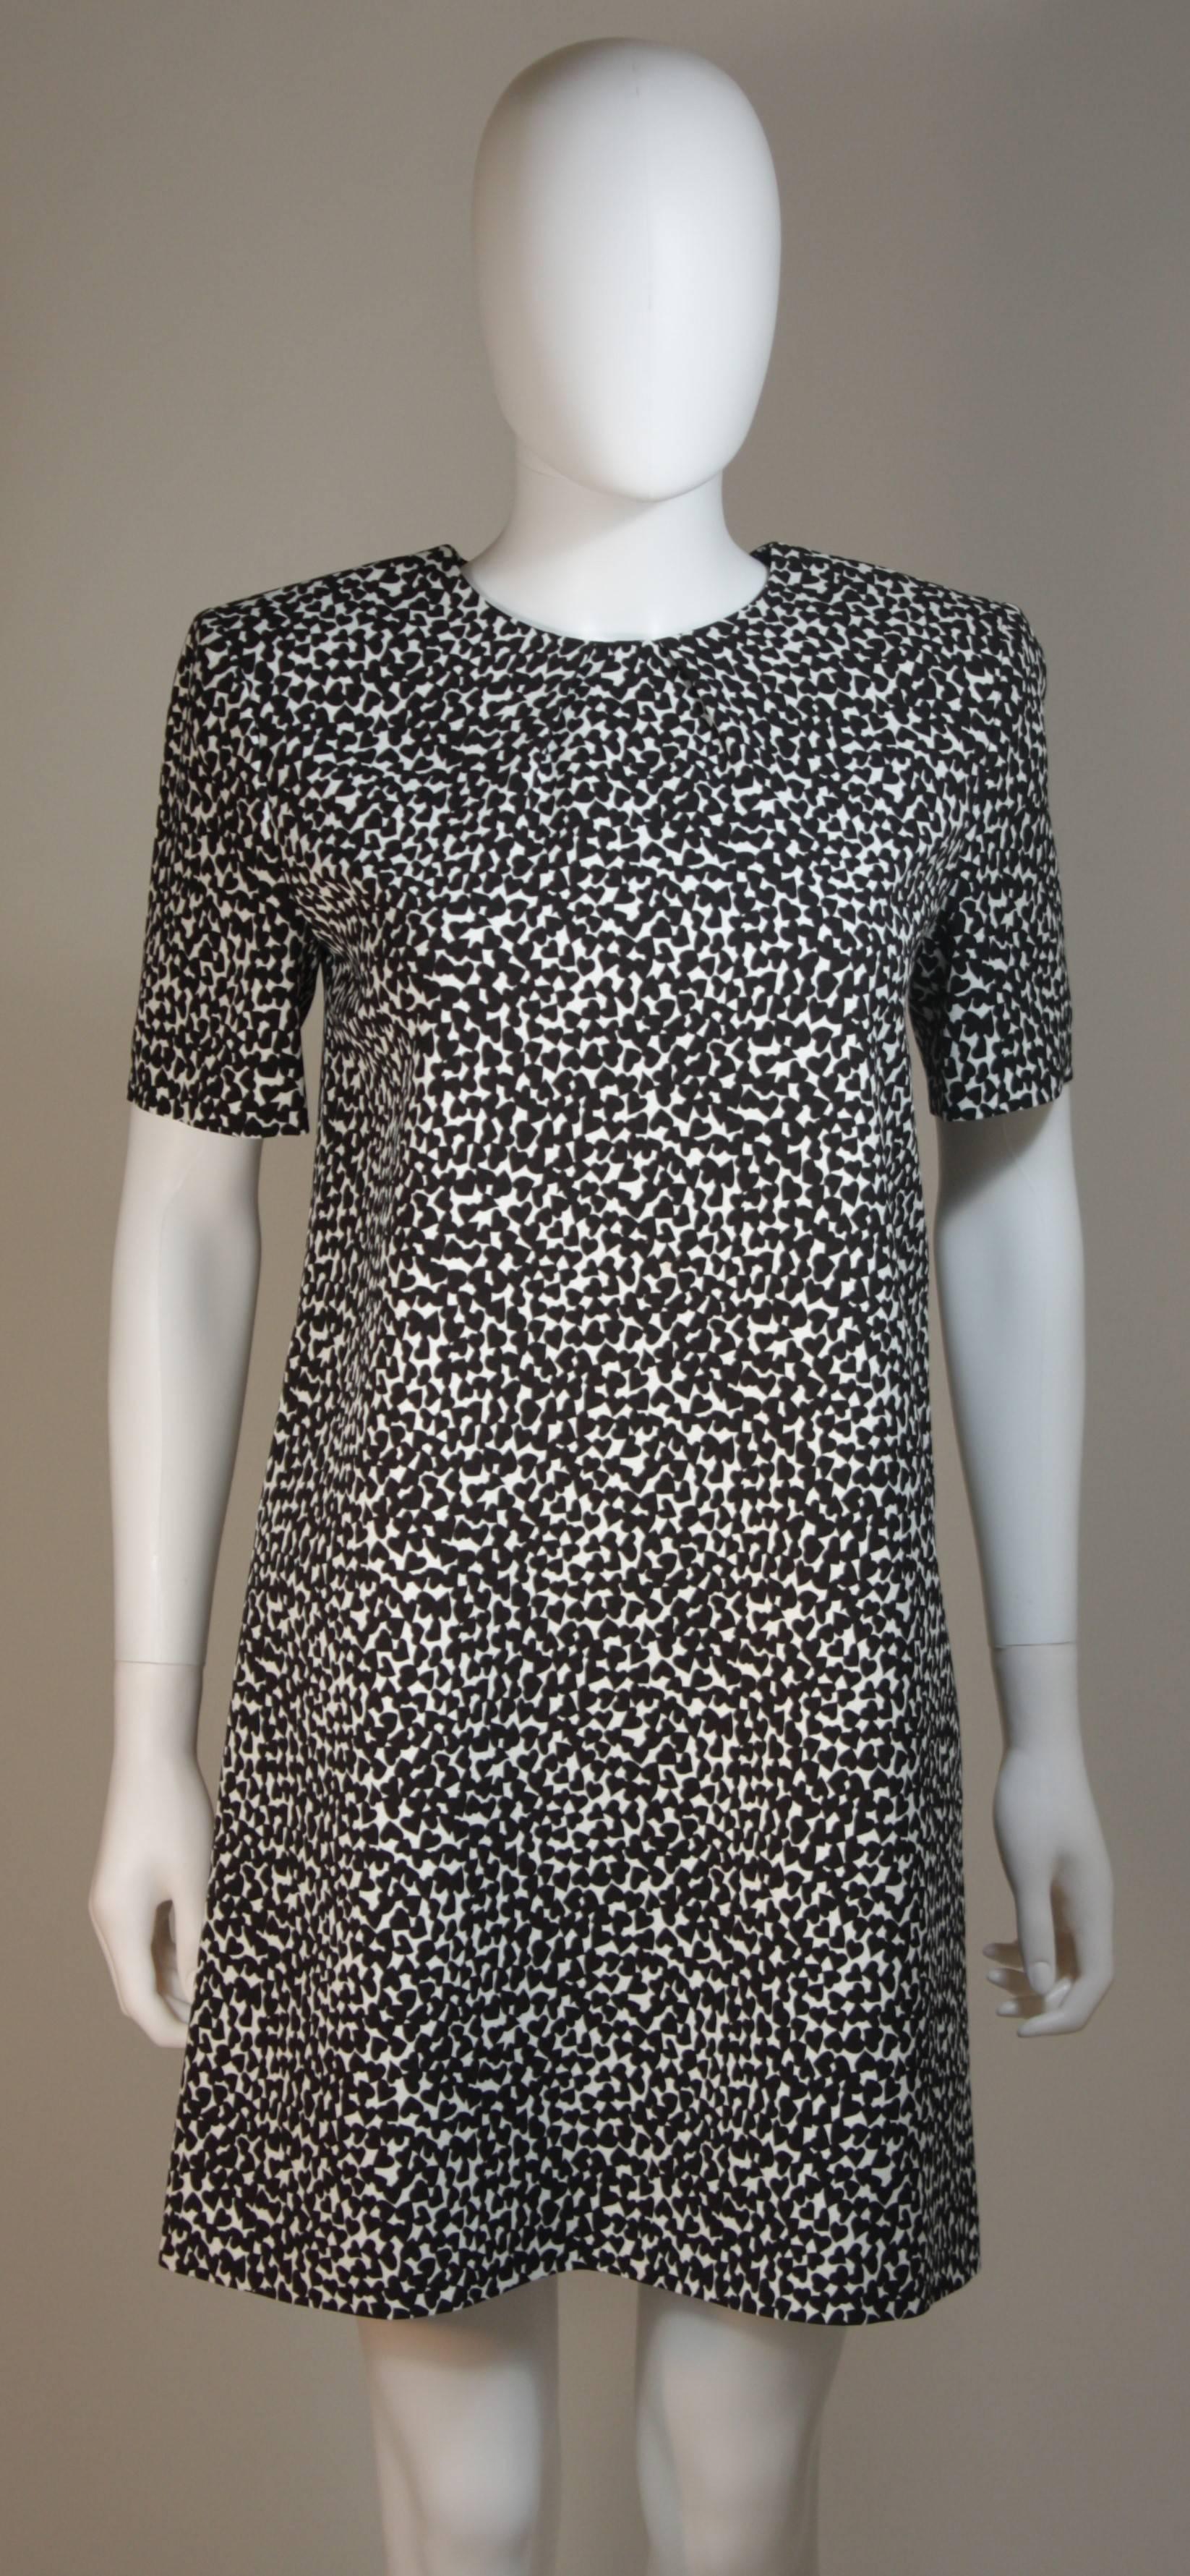 SAINT LAURENT Black and White Contrast Heart Patterned Dress 4-6 In Excellent Condition In Los Angeles, CA